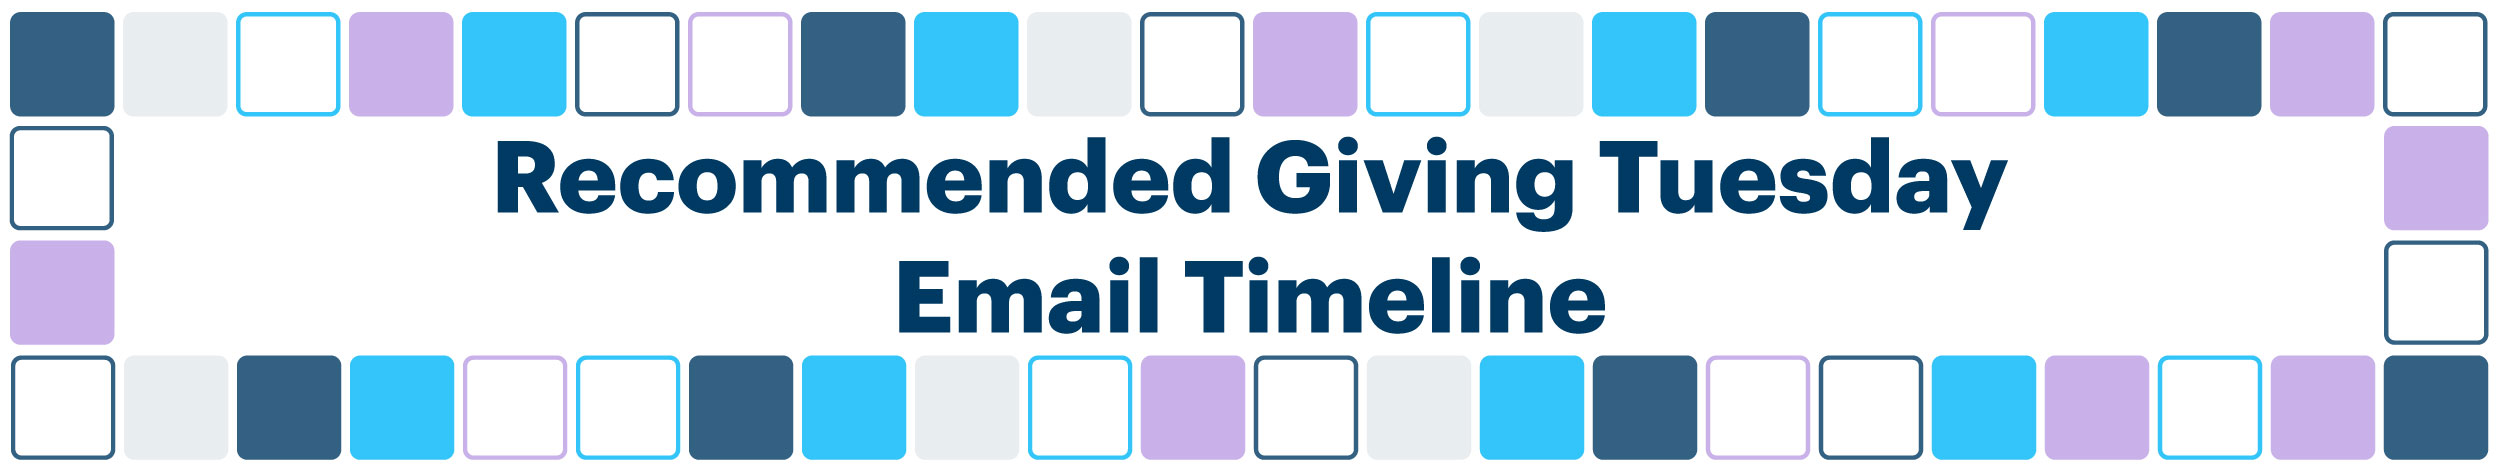 Recommended Giving Tuesday Communications Timeline